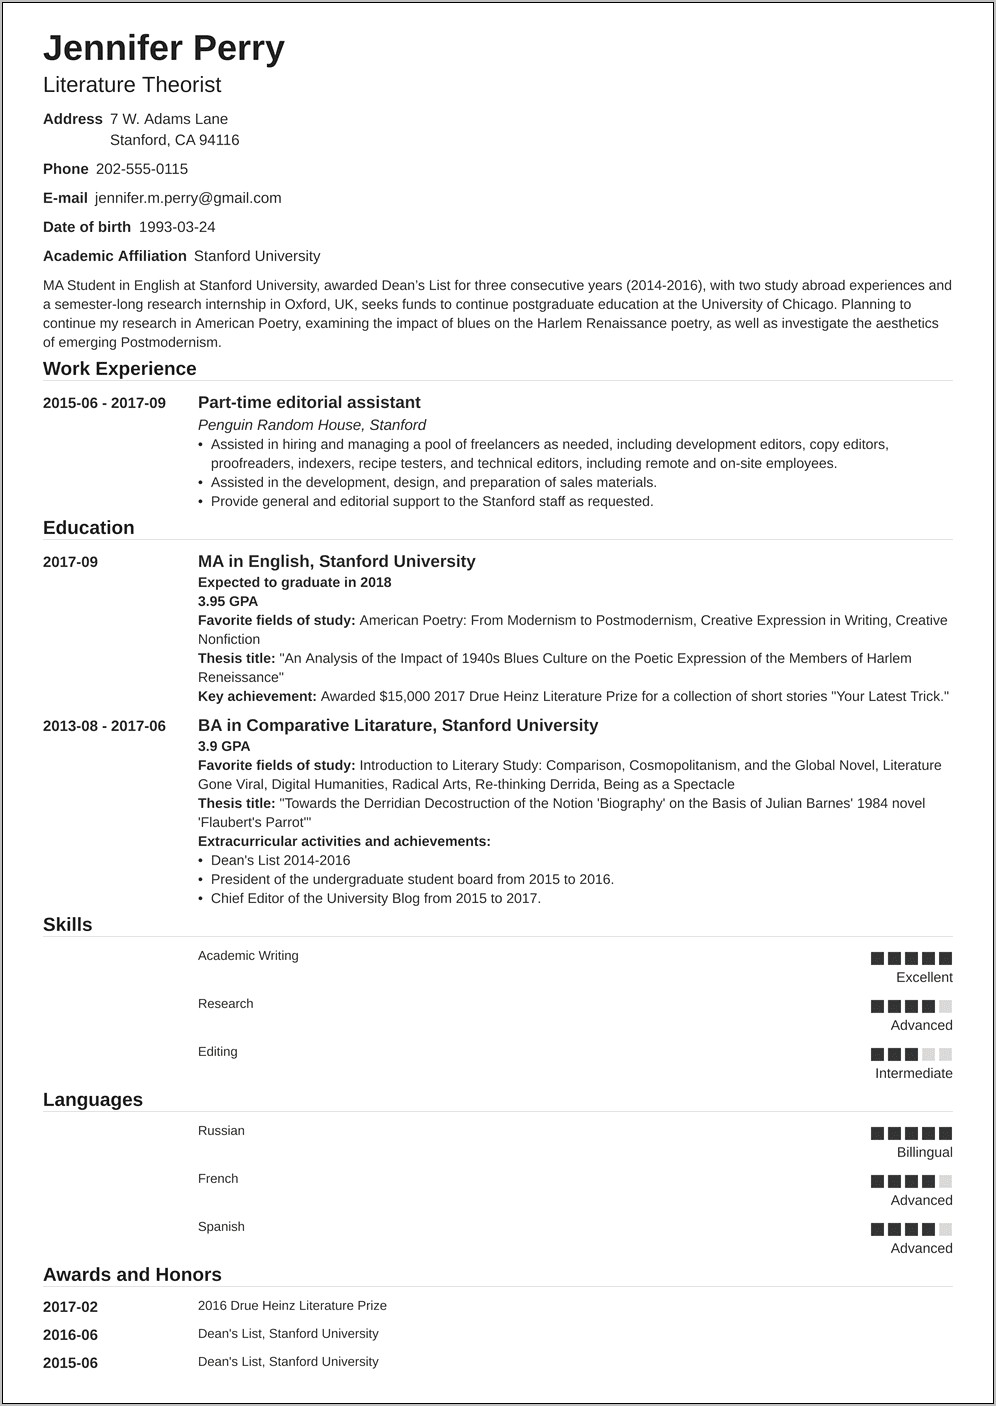 Sample Resume With Awards And Accomplishments